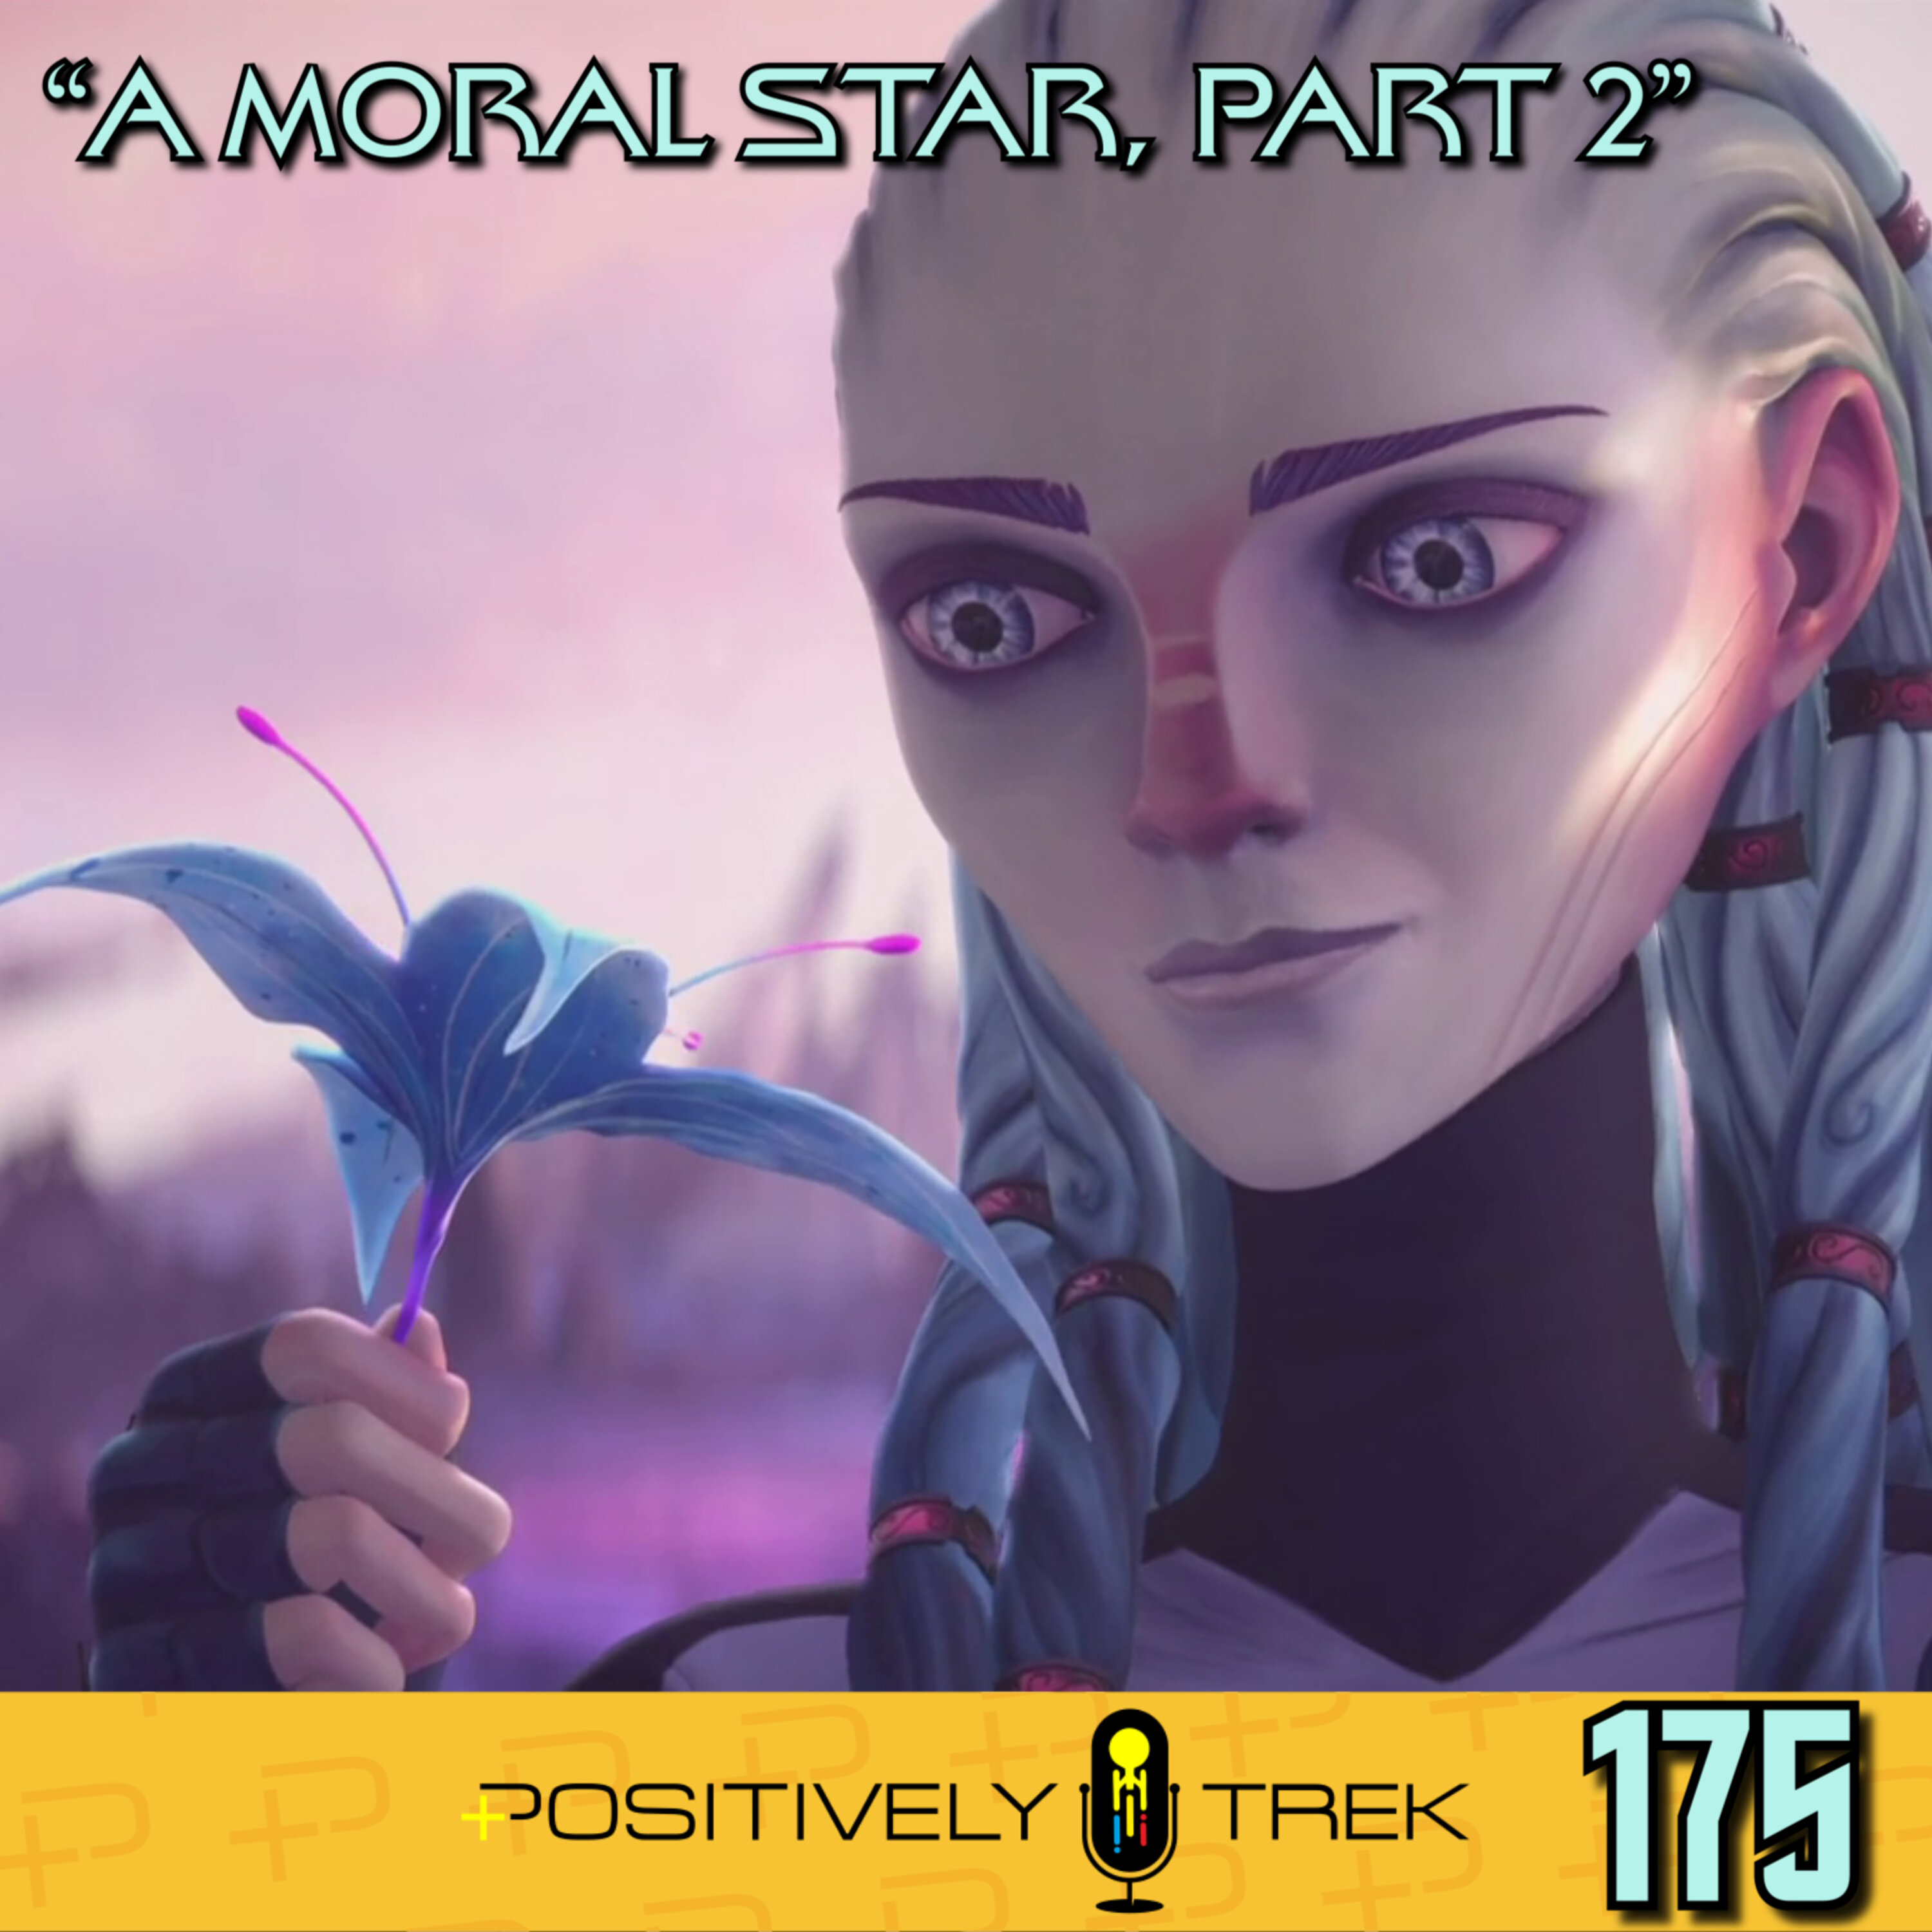 175: Prodigy Review: “A Moral Star, Part 2” (1.10) Image